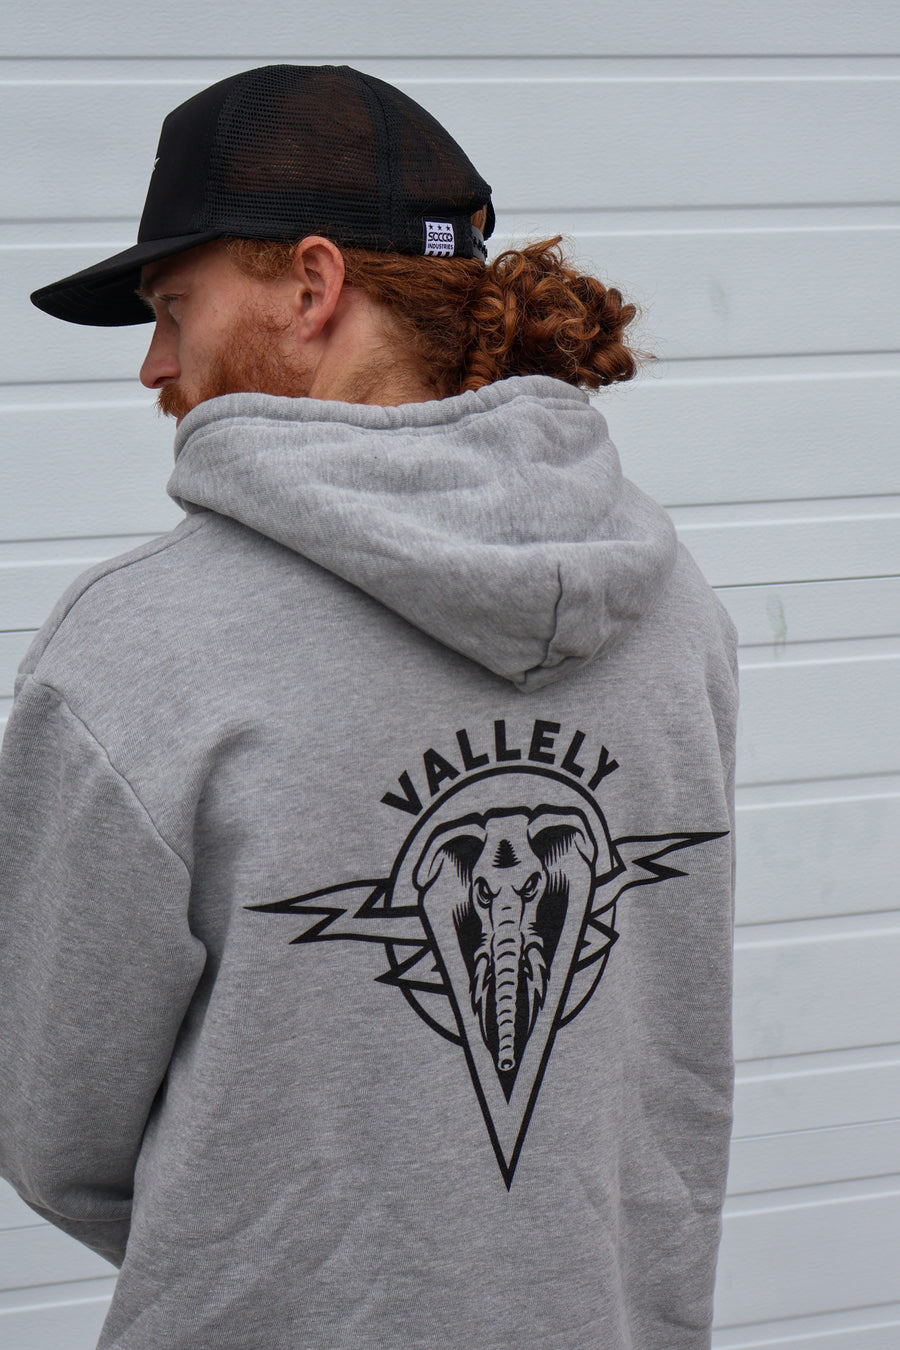 Heather Gray Dirty Donny x Mike Vallely Collaboration Logo Hoodie with White Pull Strings and Black logo on the front left chest area. Close up of Large Black Logo on the back of the Hoodie.